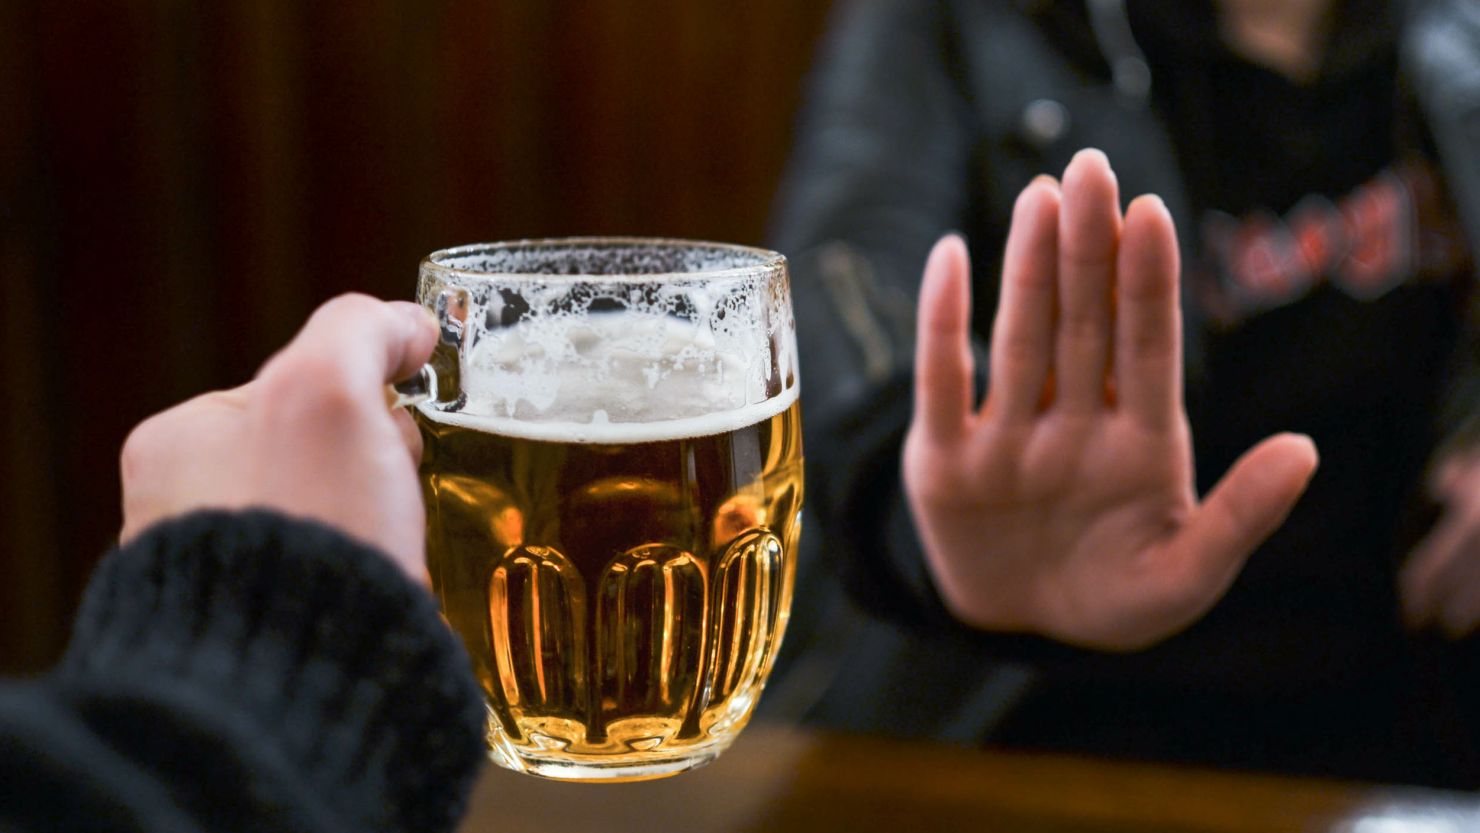 Drinking alcohol: Health experts on risks and supposed benefits